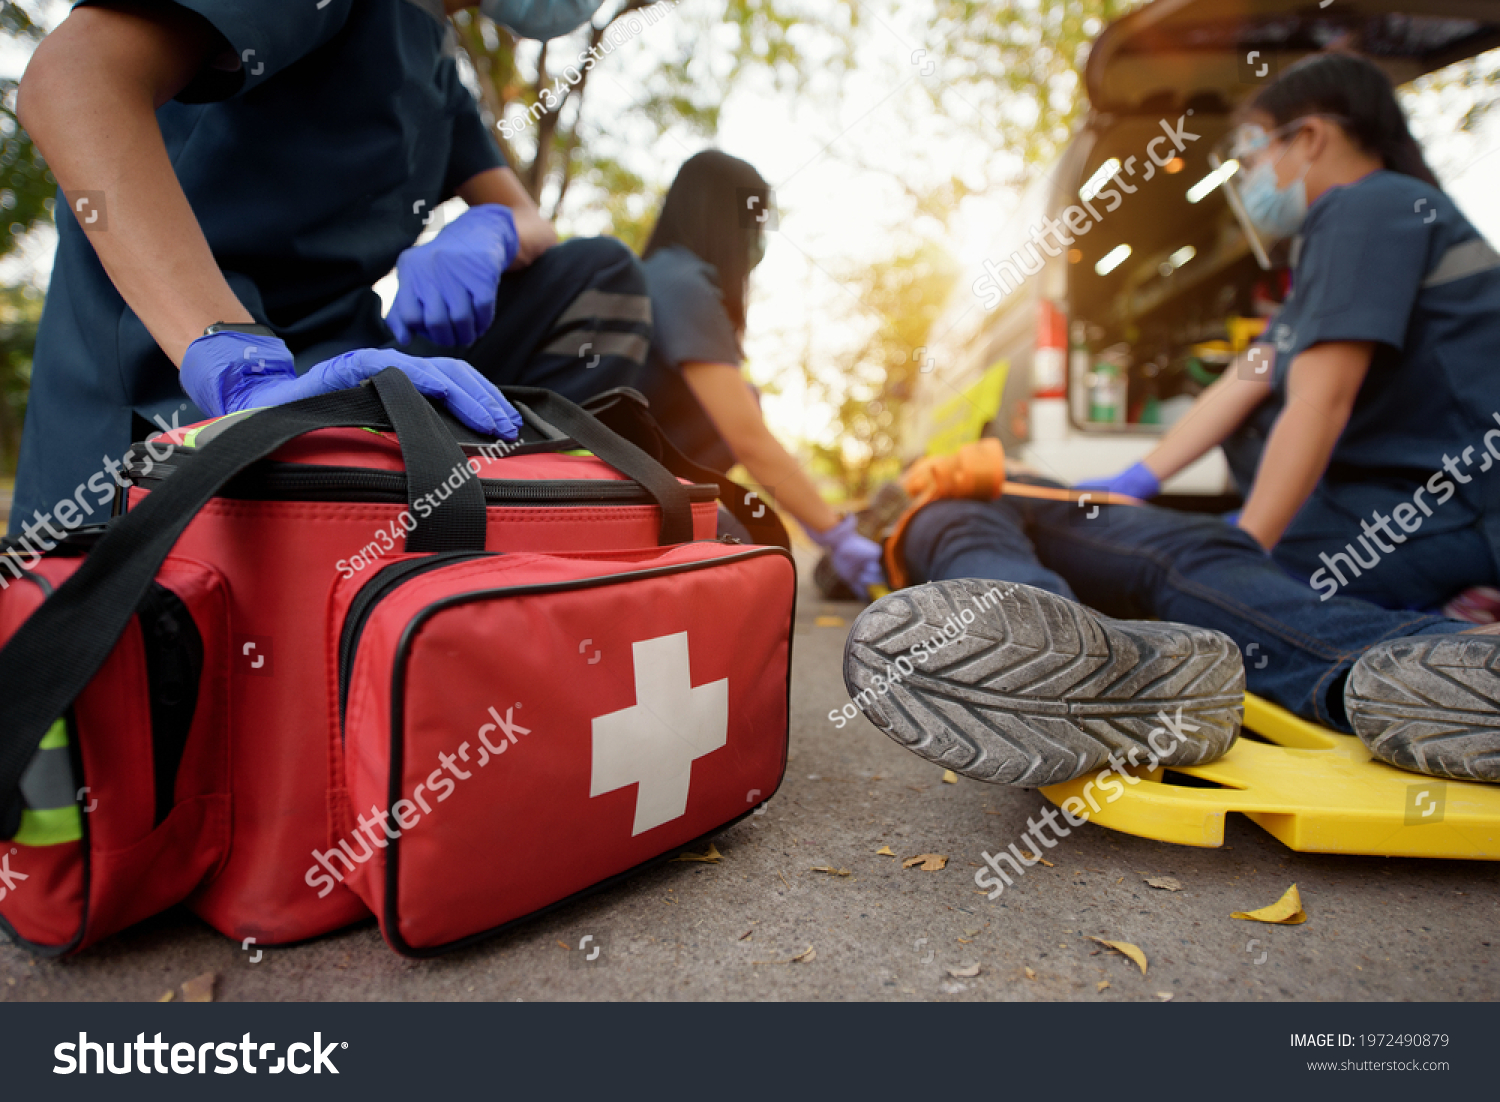 Emergency Medical First aid kit bags of first aid team service for an accident in work of worker loss of function in limbs, First aid training to transfer patient #1972490879